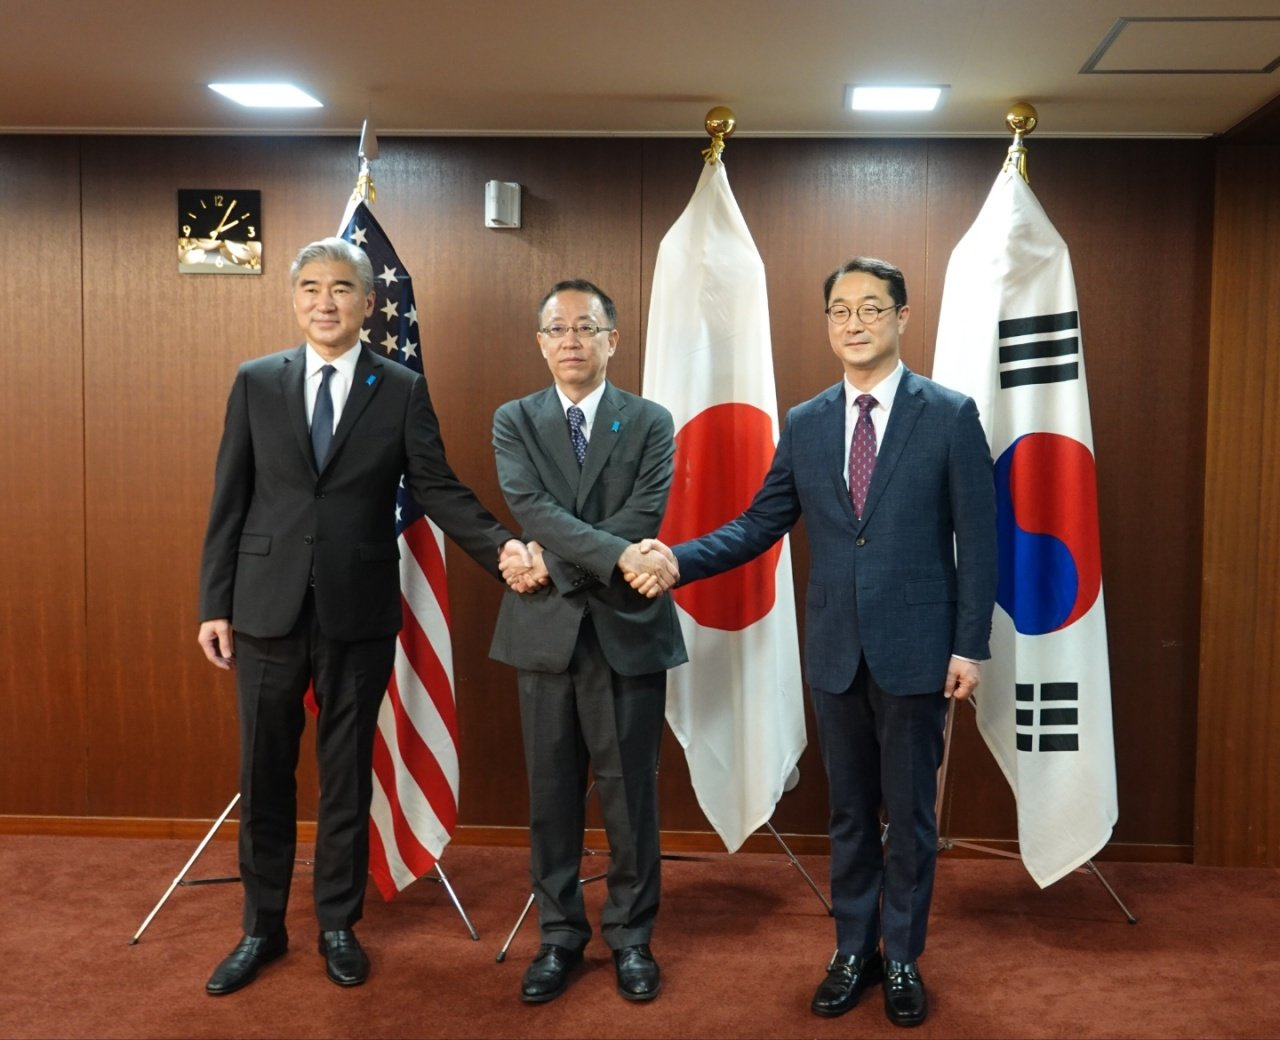 Kim Gunn, Seoul's special representative for Korean Peninsula peace and security affairs (right), shakes hands with Sung Kim, Washington's special representative for North Korea (left), and Takehiro Funakoshi, director general for Asian and Oceanian affairs at Japan’s Foreign Ministry before their trilateral talk at the Japanese Foreign Ministry in Tokyo, Japan on Sept. 7. (Yonhap)